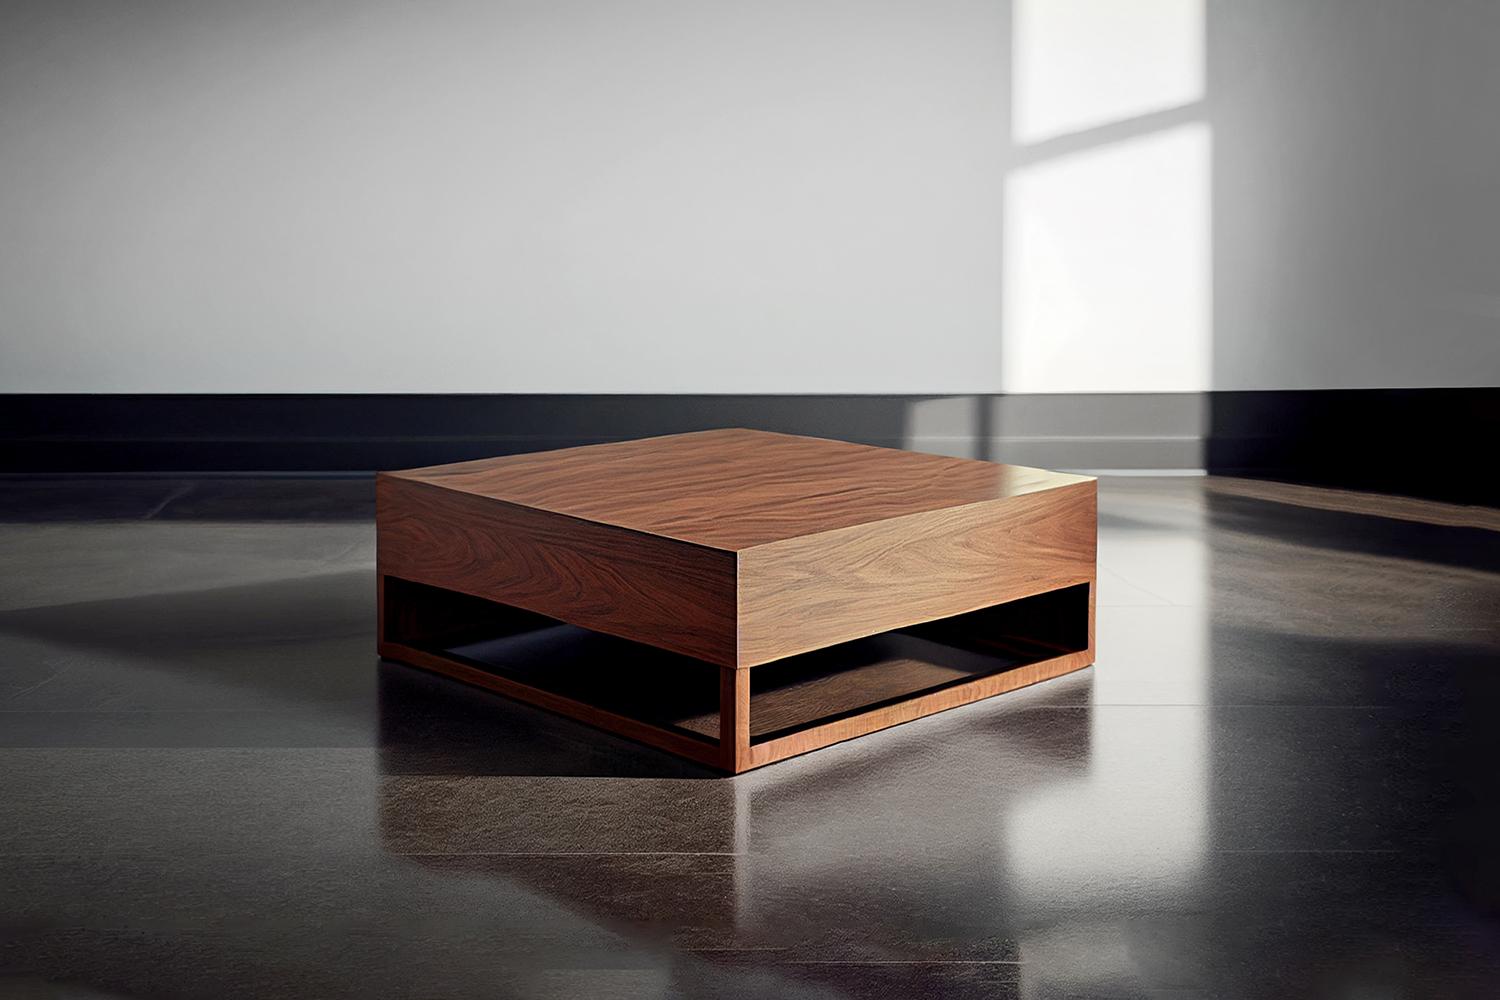 Minimalist square coffee table in walnut veneer, table by Joel Escalona 

The Basilica Tables, designed by Joel Escalona for NONO furniture, embody a union of elegance and practicality. They promote a contemporary lifestyle, fit for a home with